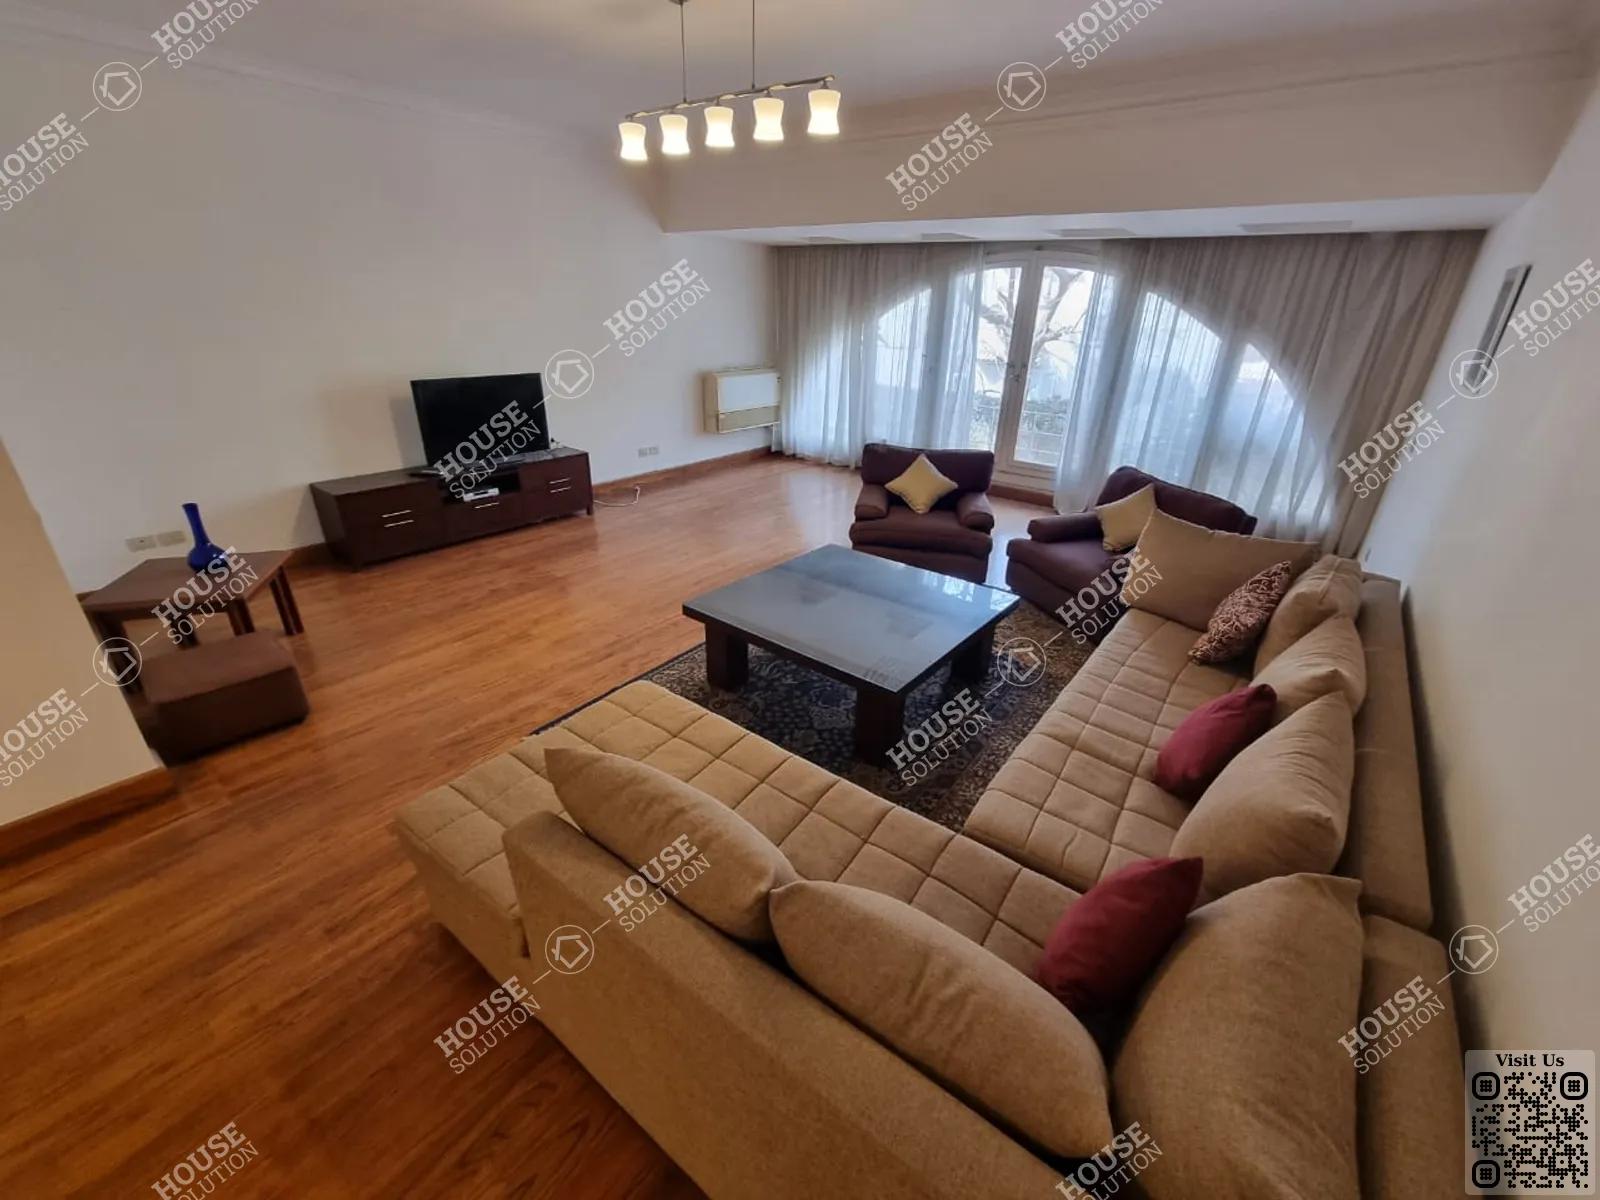 RECEPTION  @ Apartments For Rent In Maadi Maadi Sarayat Area: 250 m² consists of 3 Bedrooms 3 Bathrooms Modern furnished 5 stars #4870-1